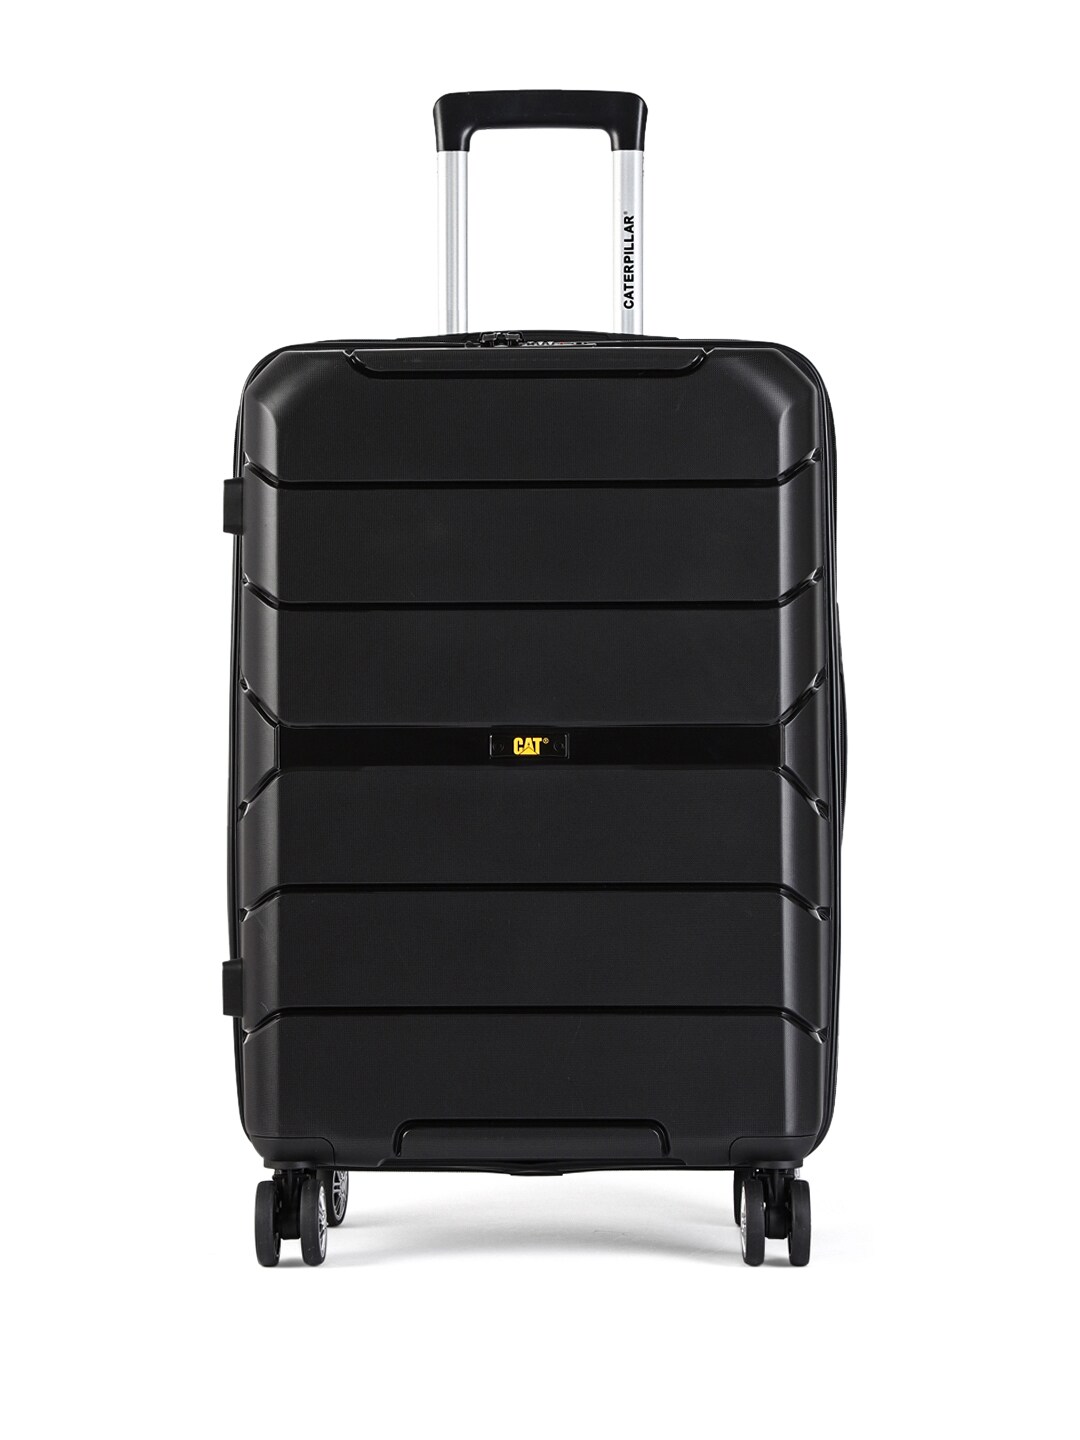 CAT ARMOR Black Solid Hard Side Medium Trolley Suitcase Price in India